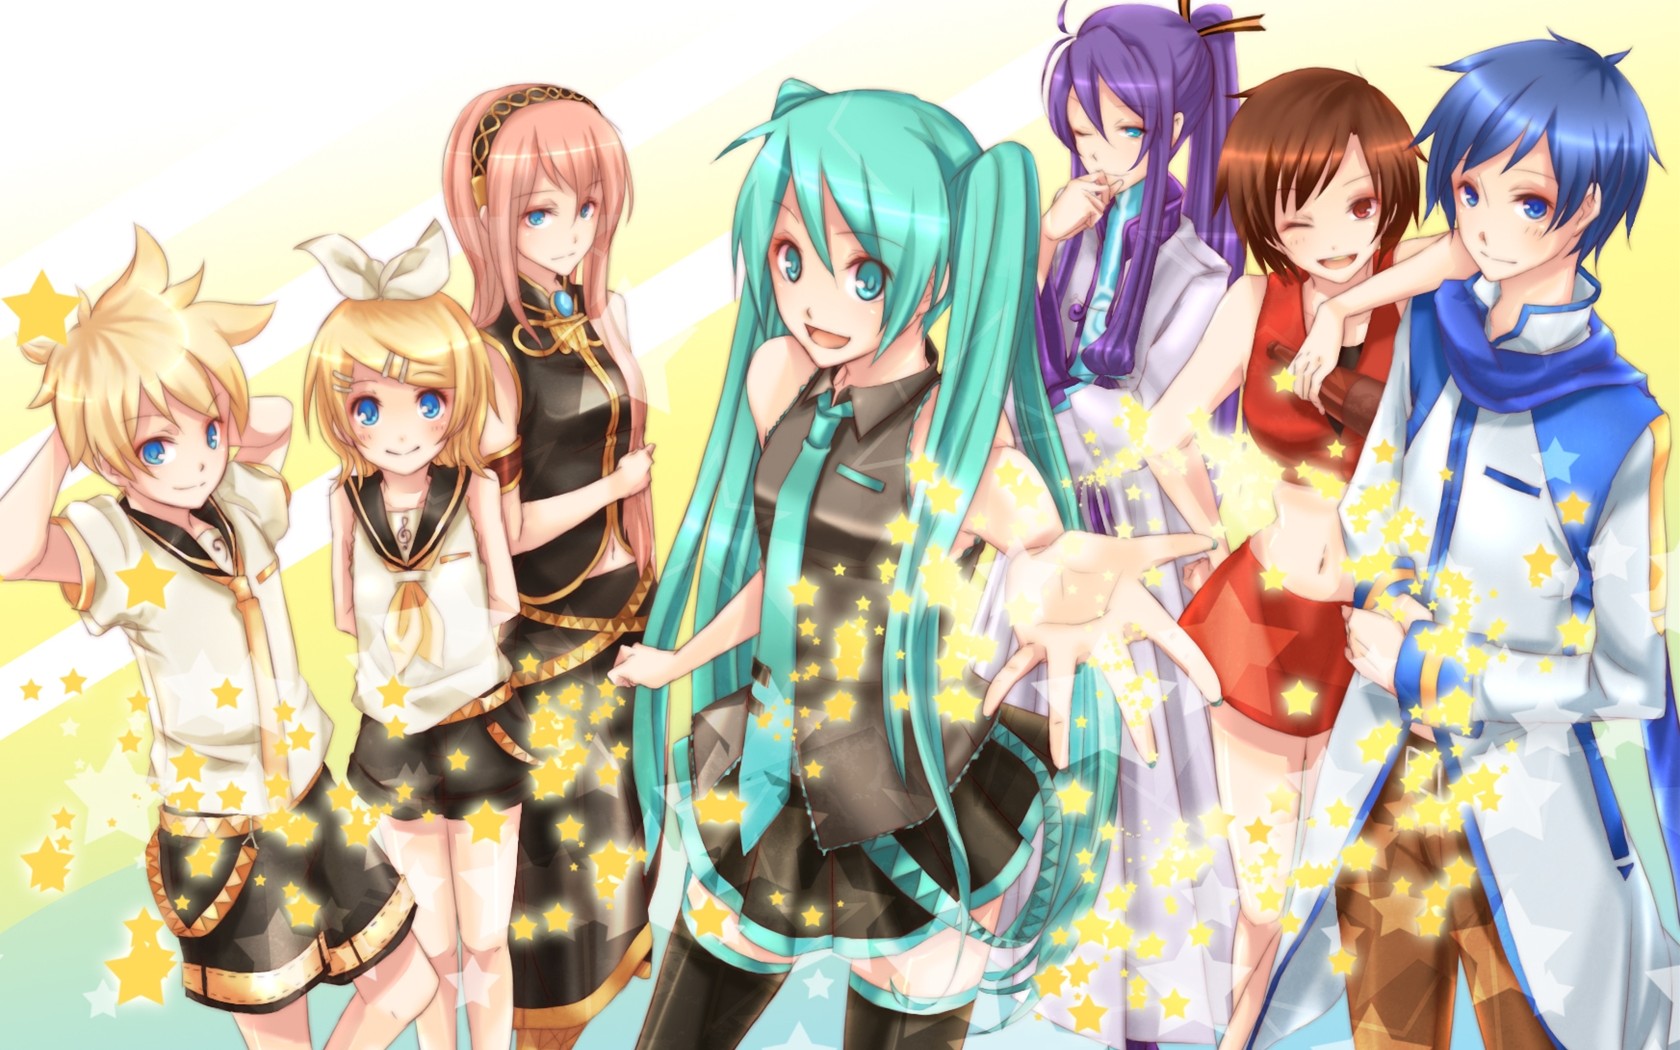 Vocaloid ボーカロイド 壁紙家 初音ミク その他複数 壁紙no 88 90